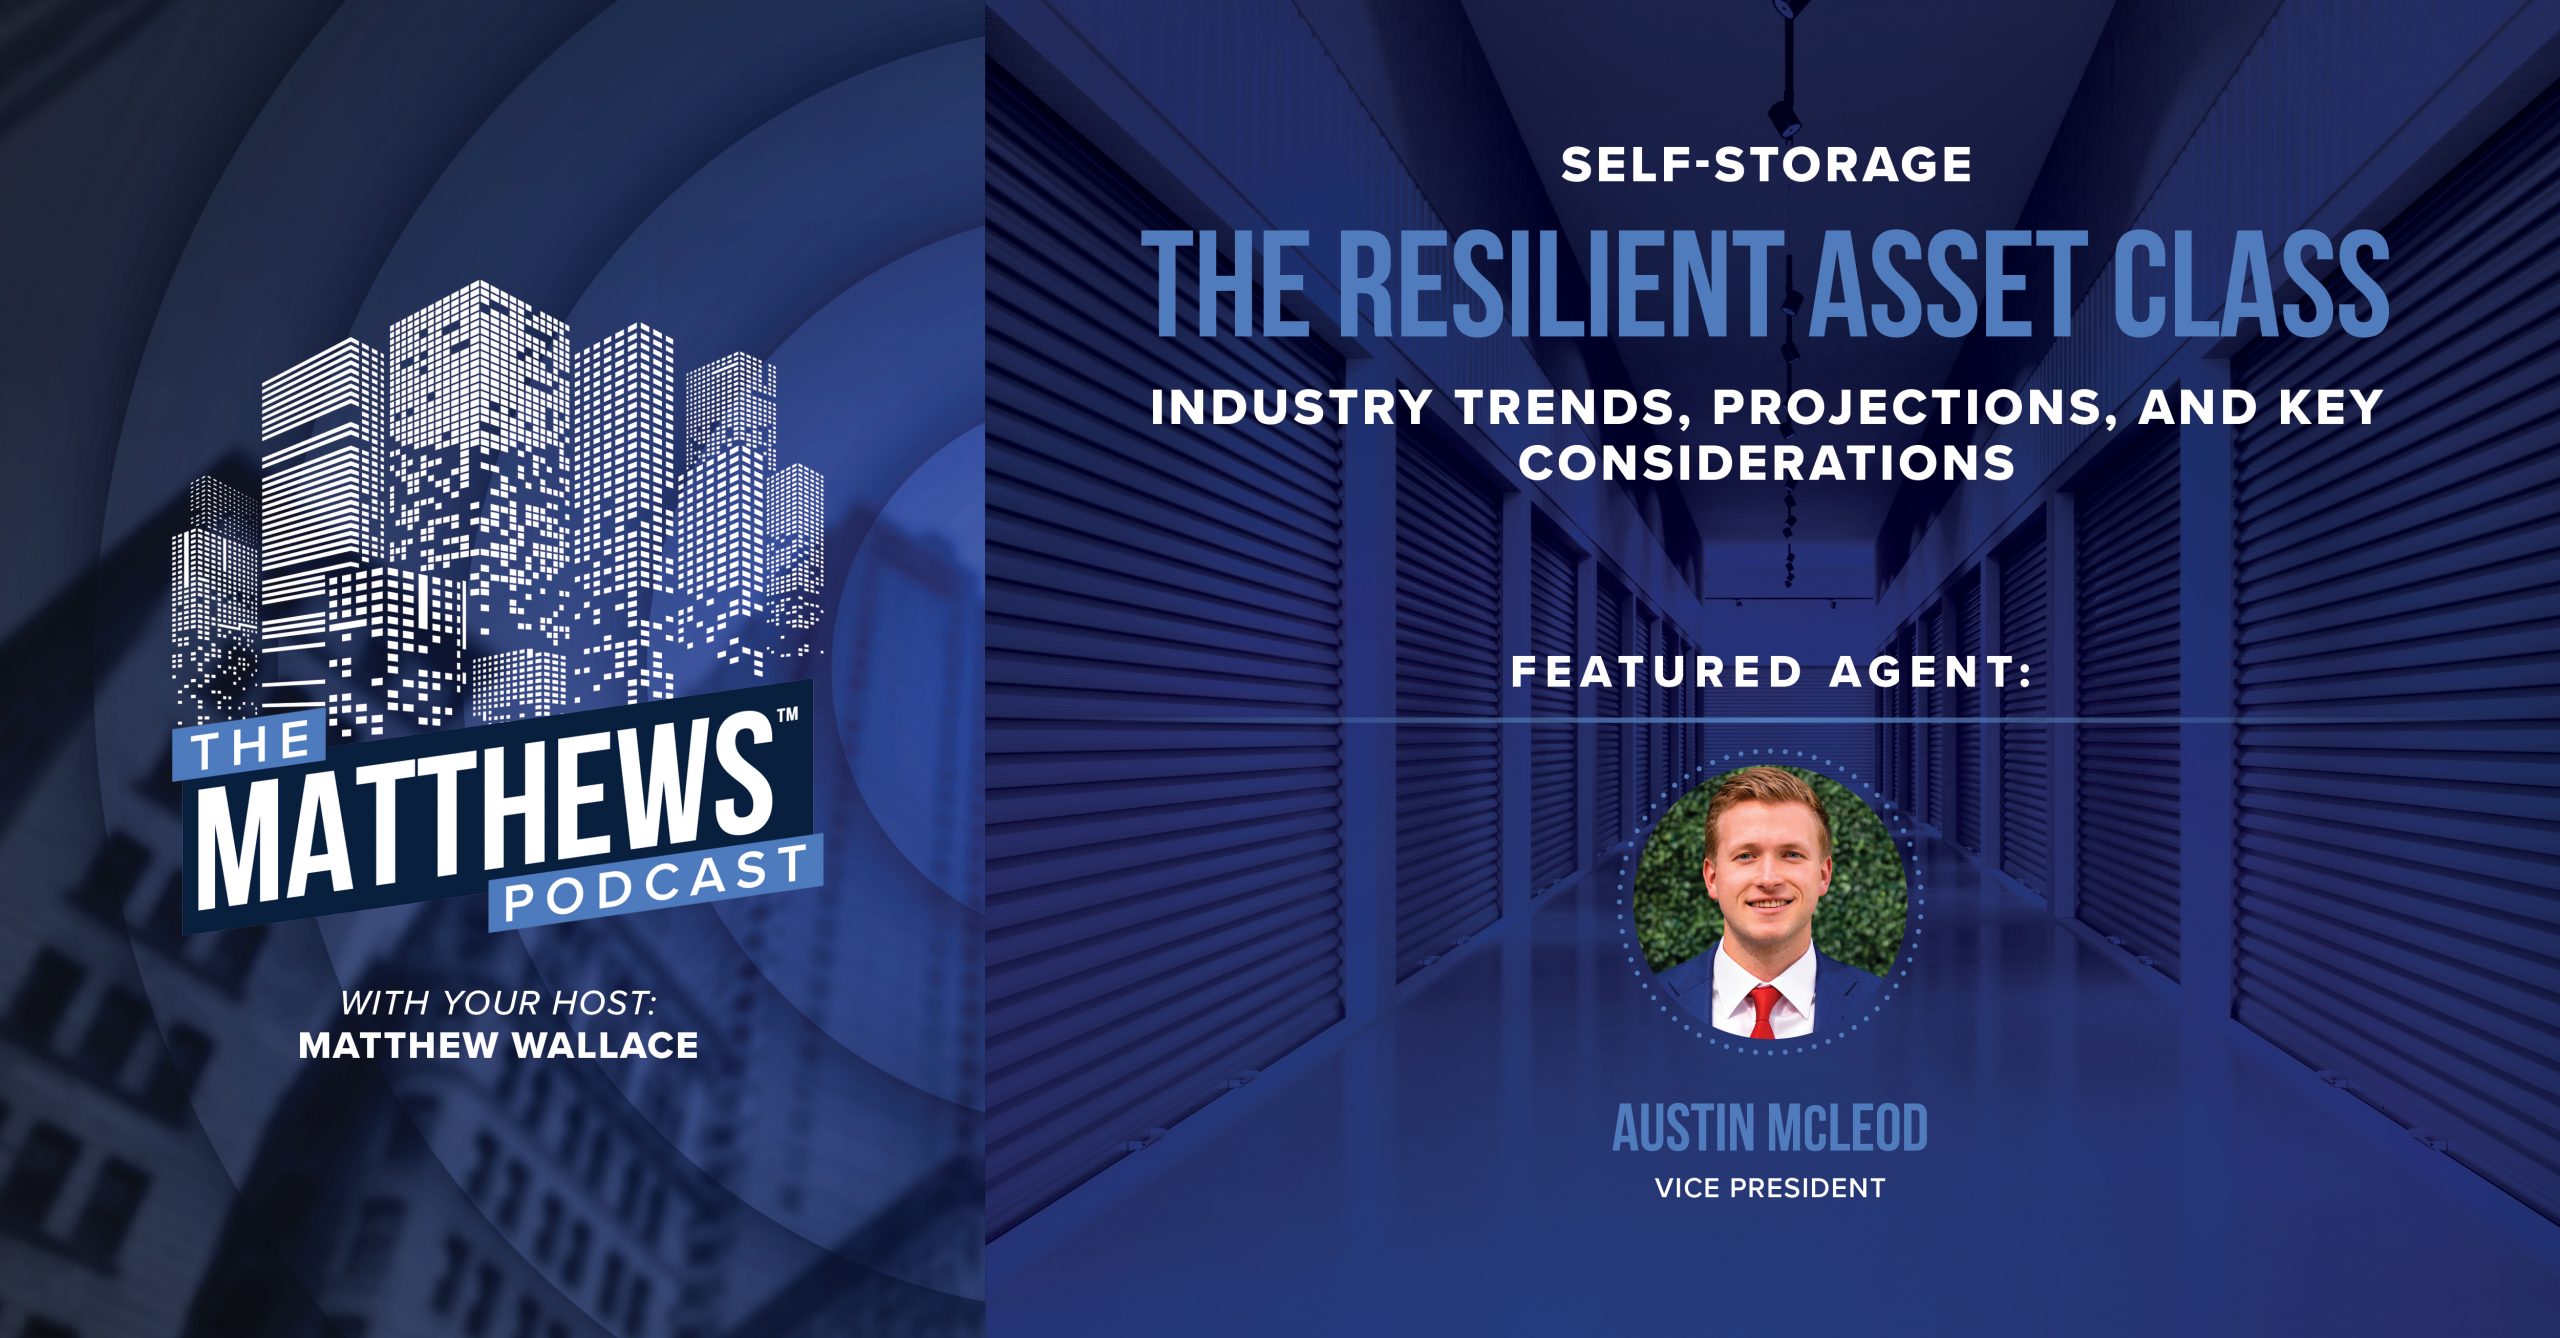 podcast about resiliency within self-storage